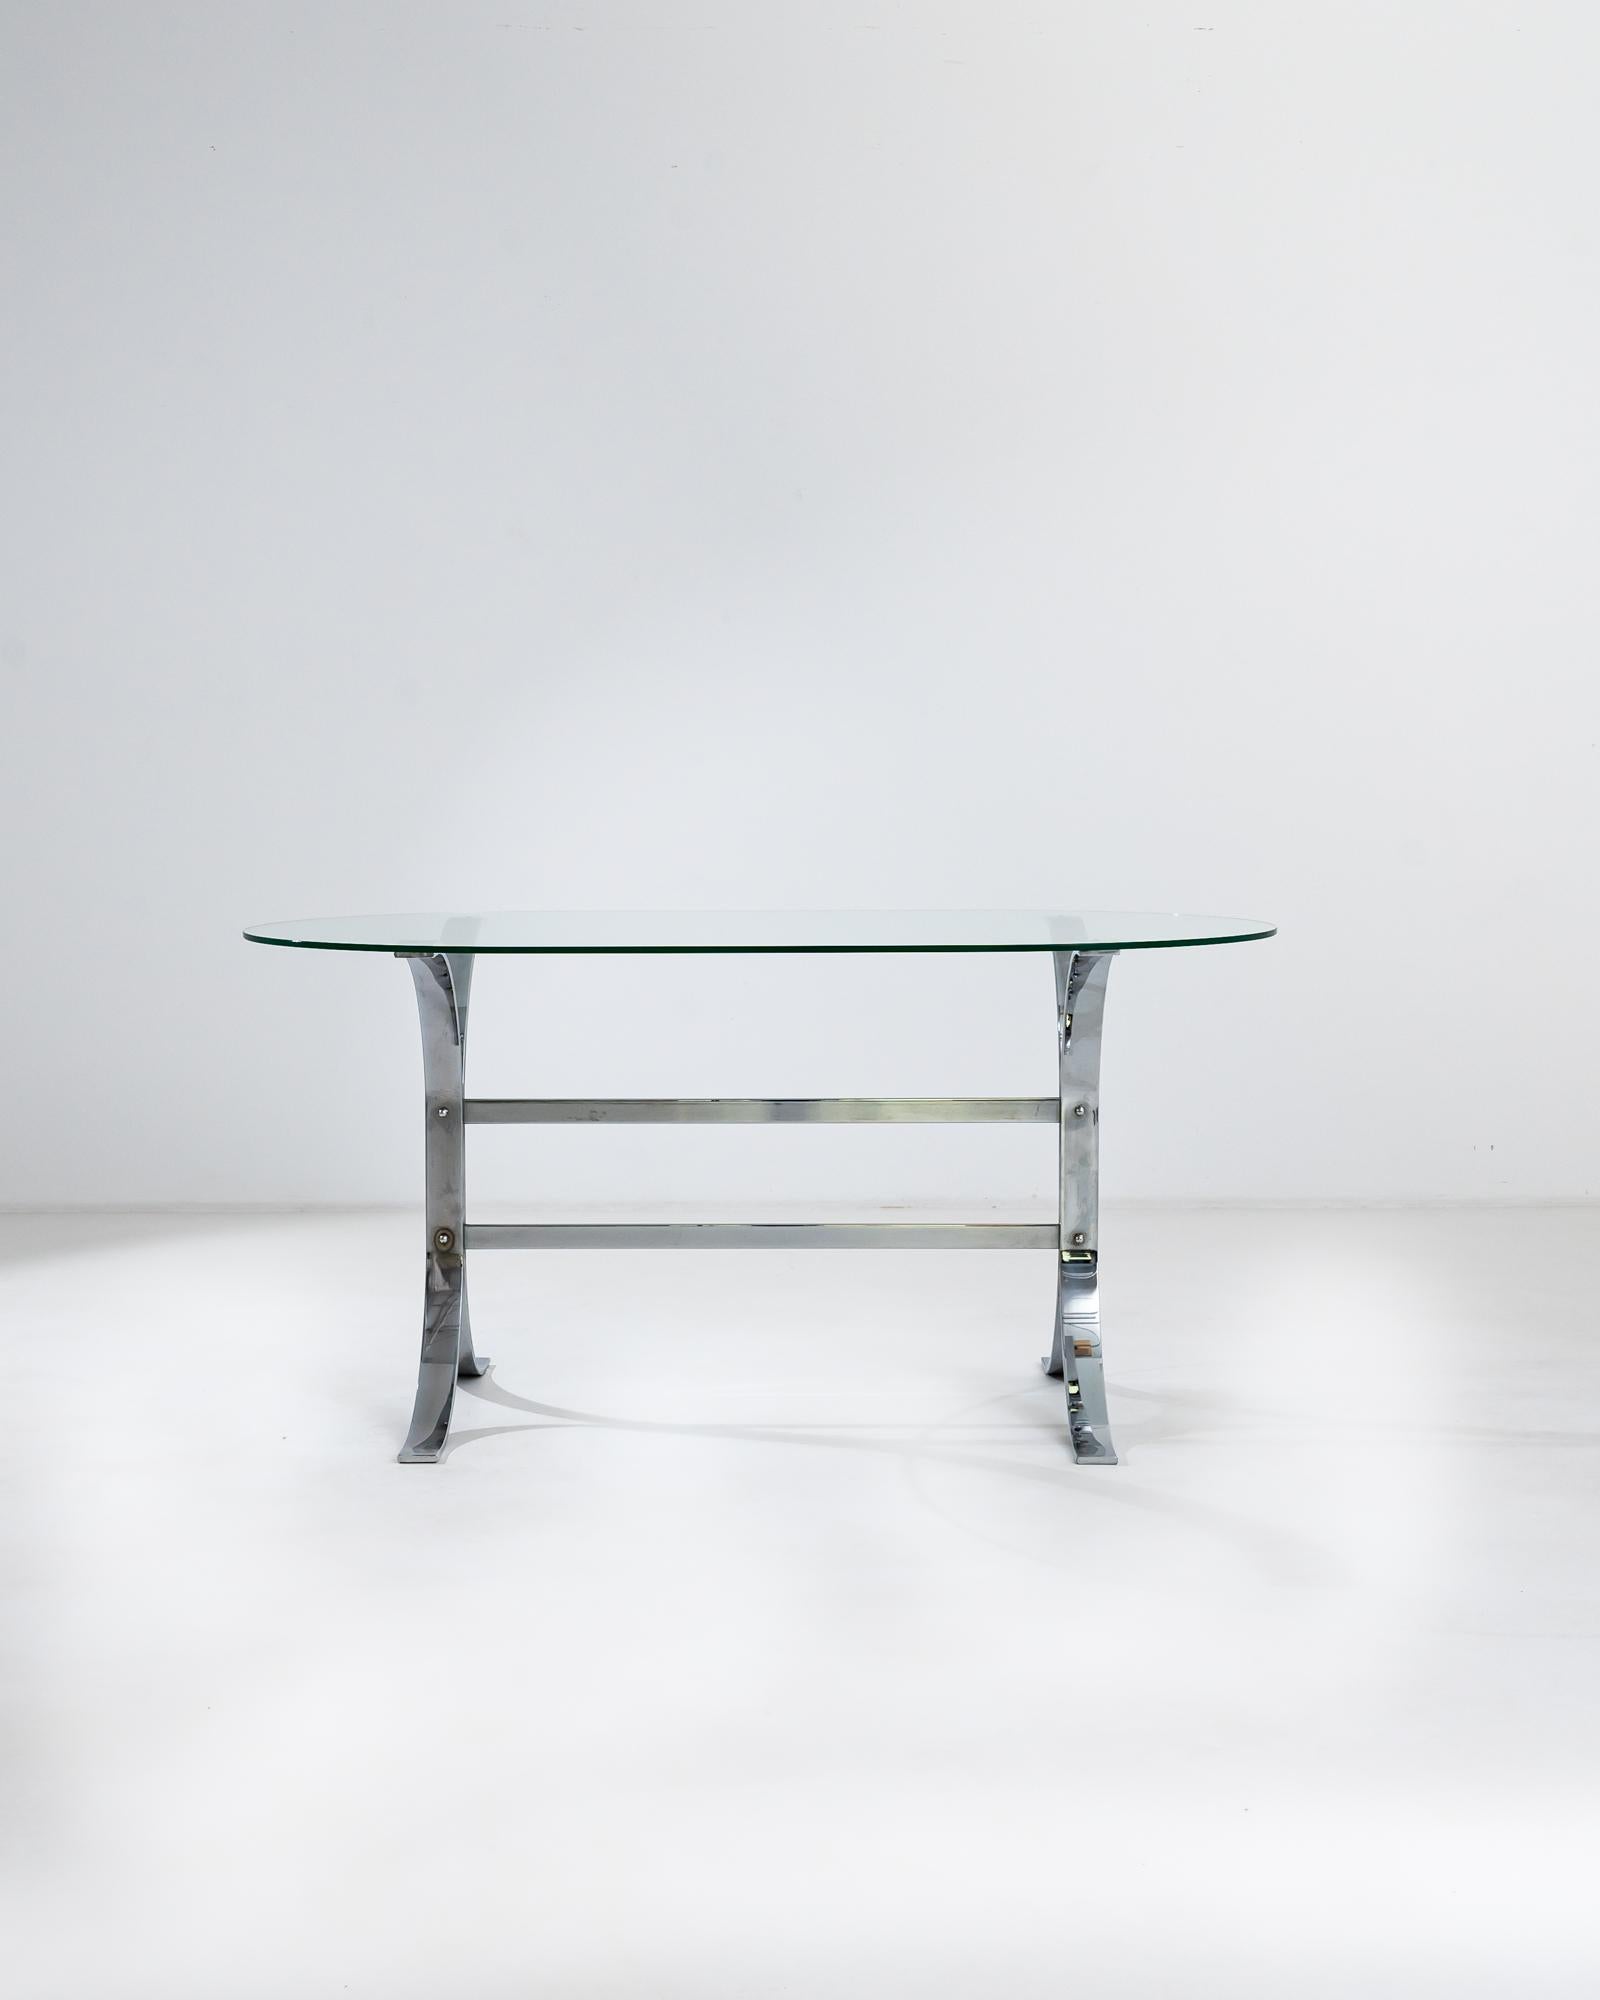 A 20th century Italian dining table made from metal with a glass top. This trestle table is constructed of thick, bent metal bars and exposed hardware, creating a symmetrical composition with brutalist charm. Industrial in its conception, though